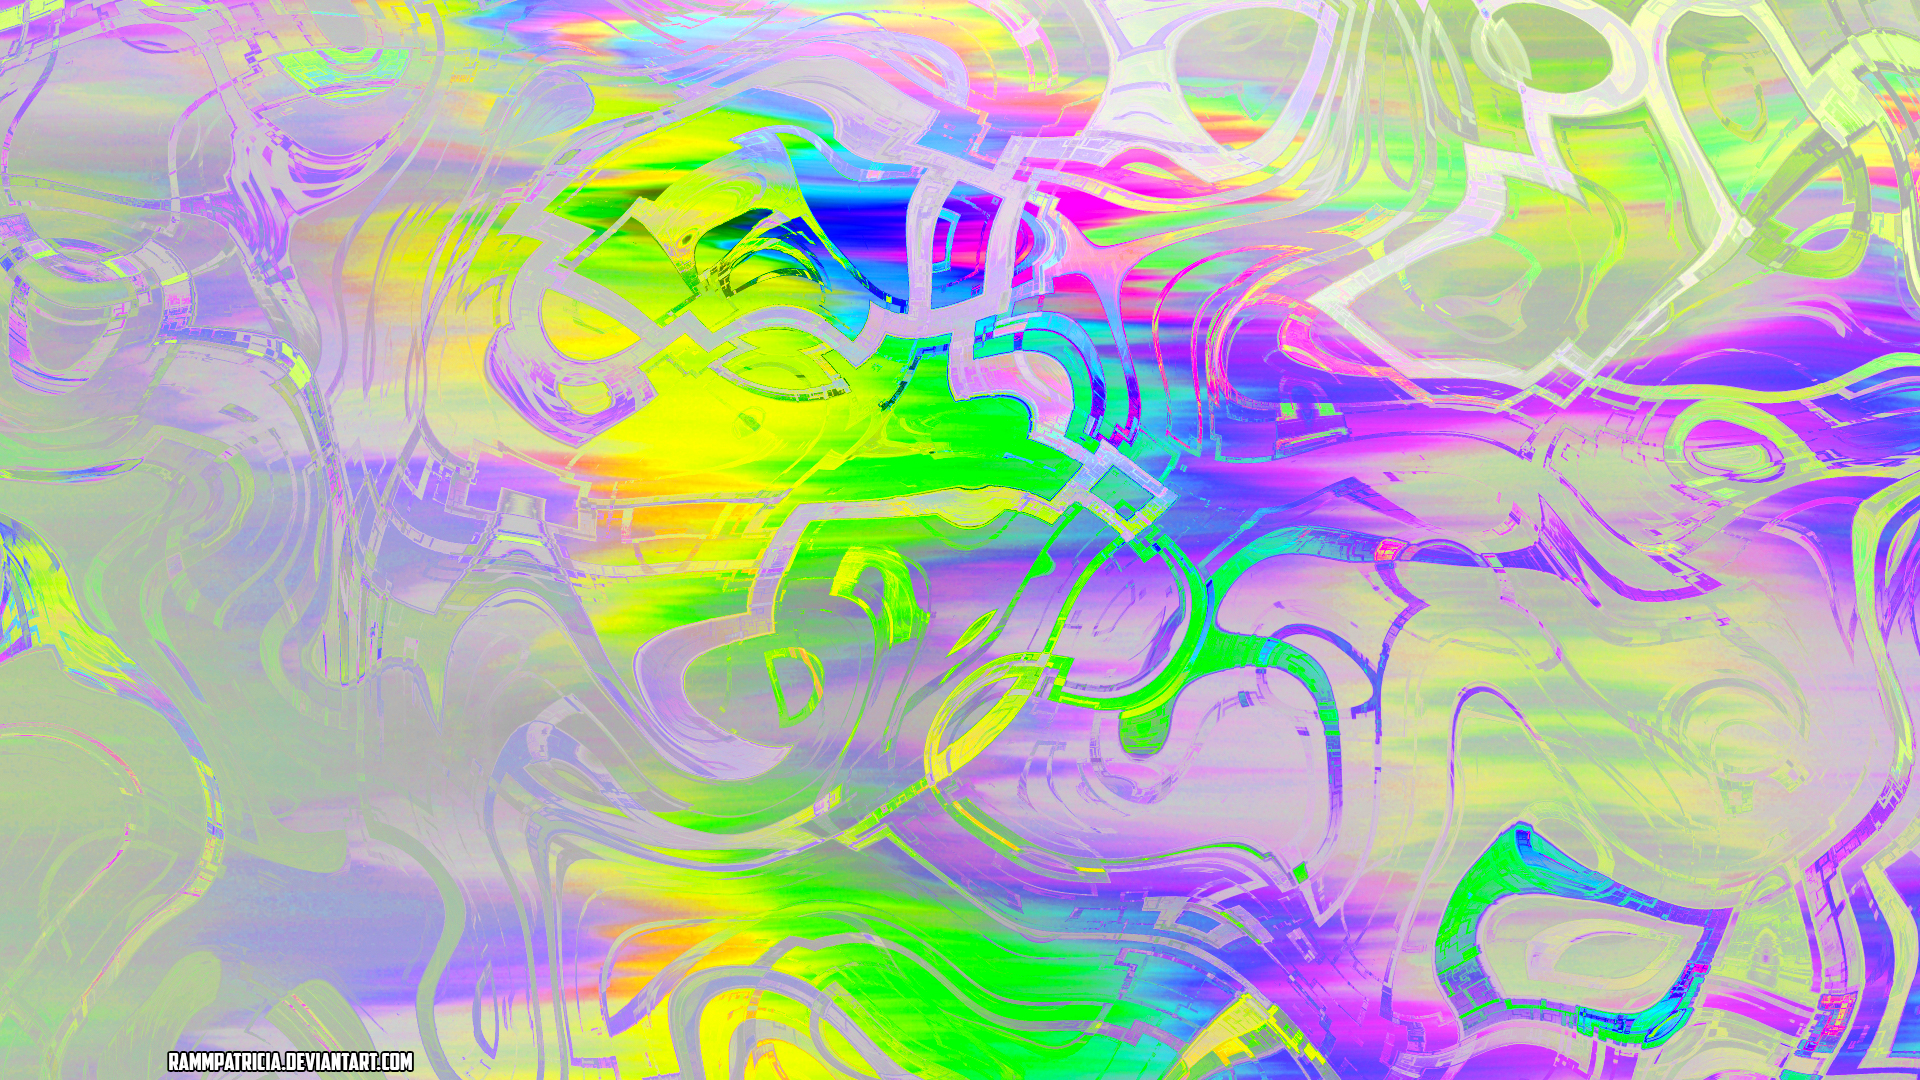 General 1920x1080 RammPatricia abstract digital art colorful watermarked